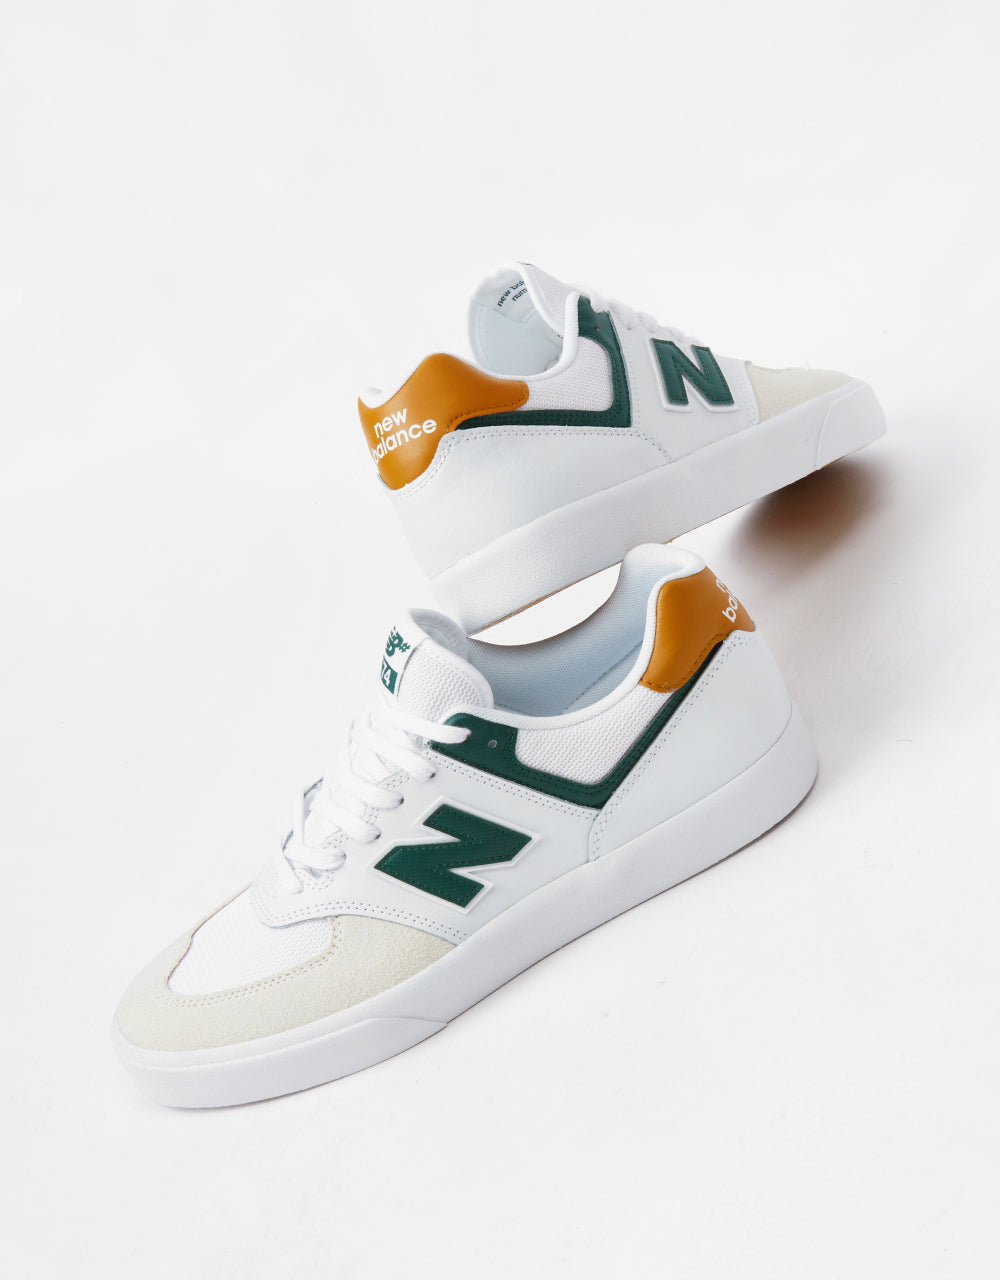 New Balance Numeric 574 Vulc Skate Shoes - White/Forest